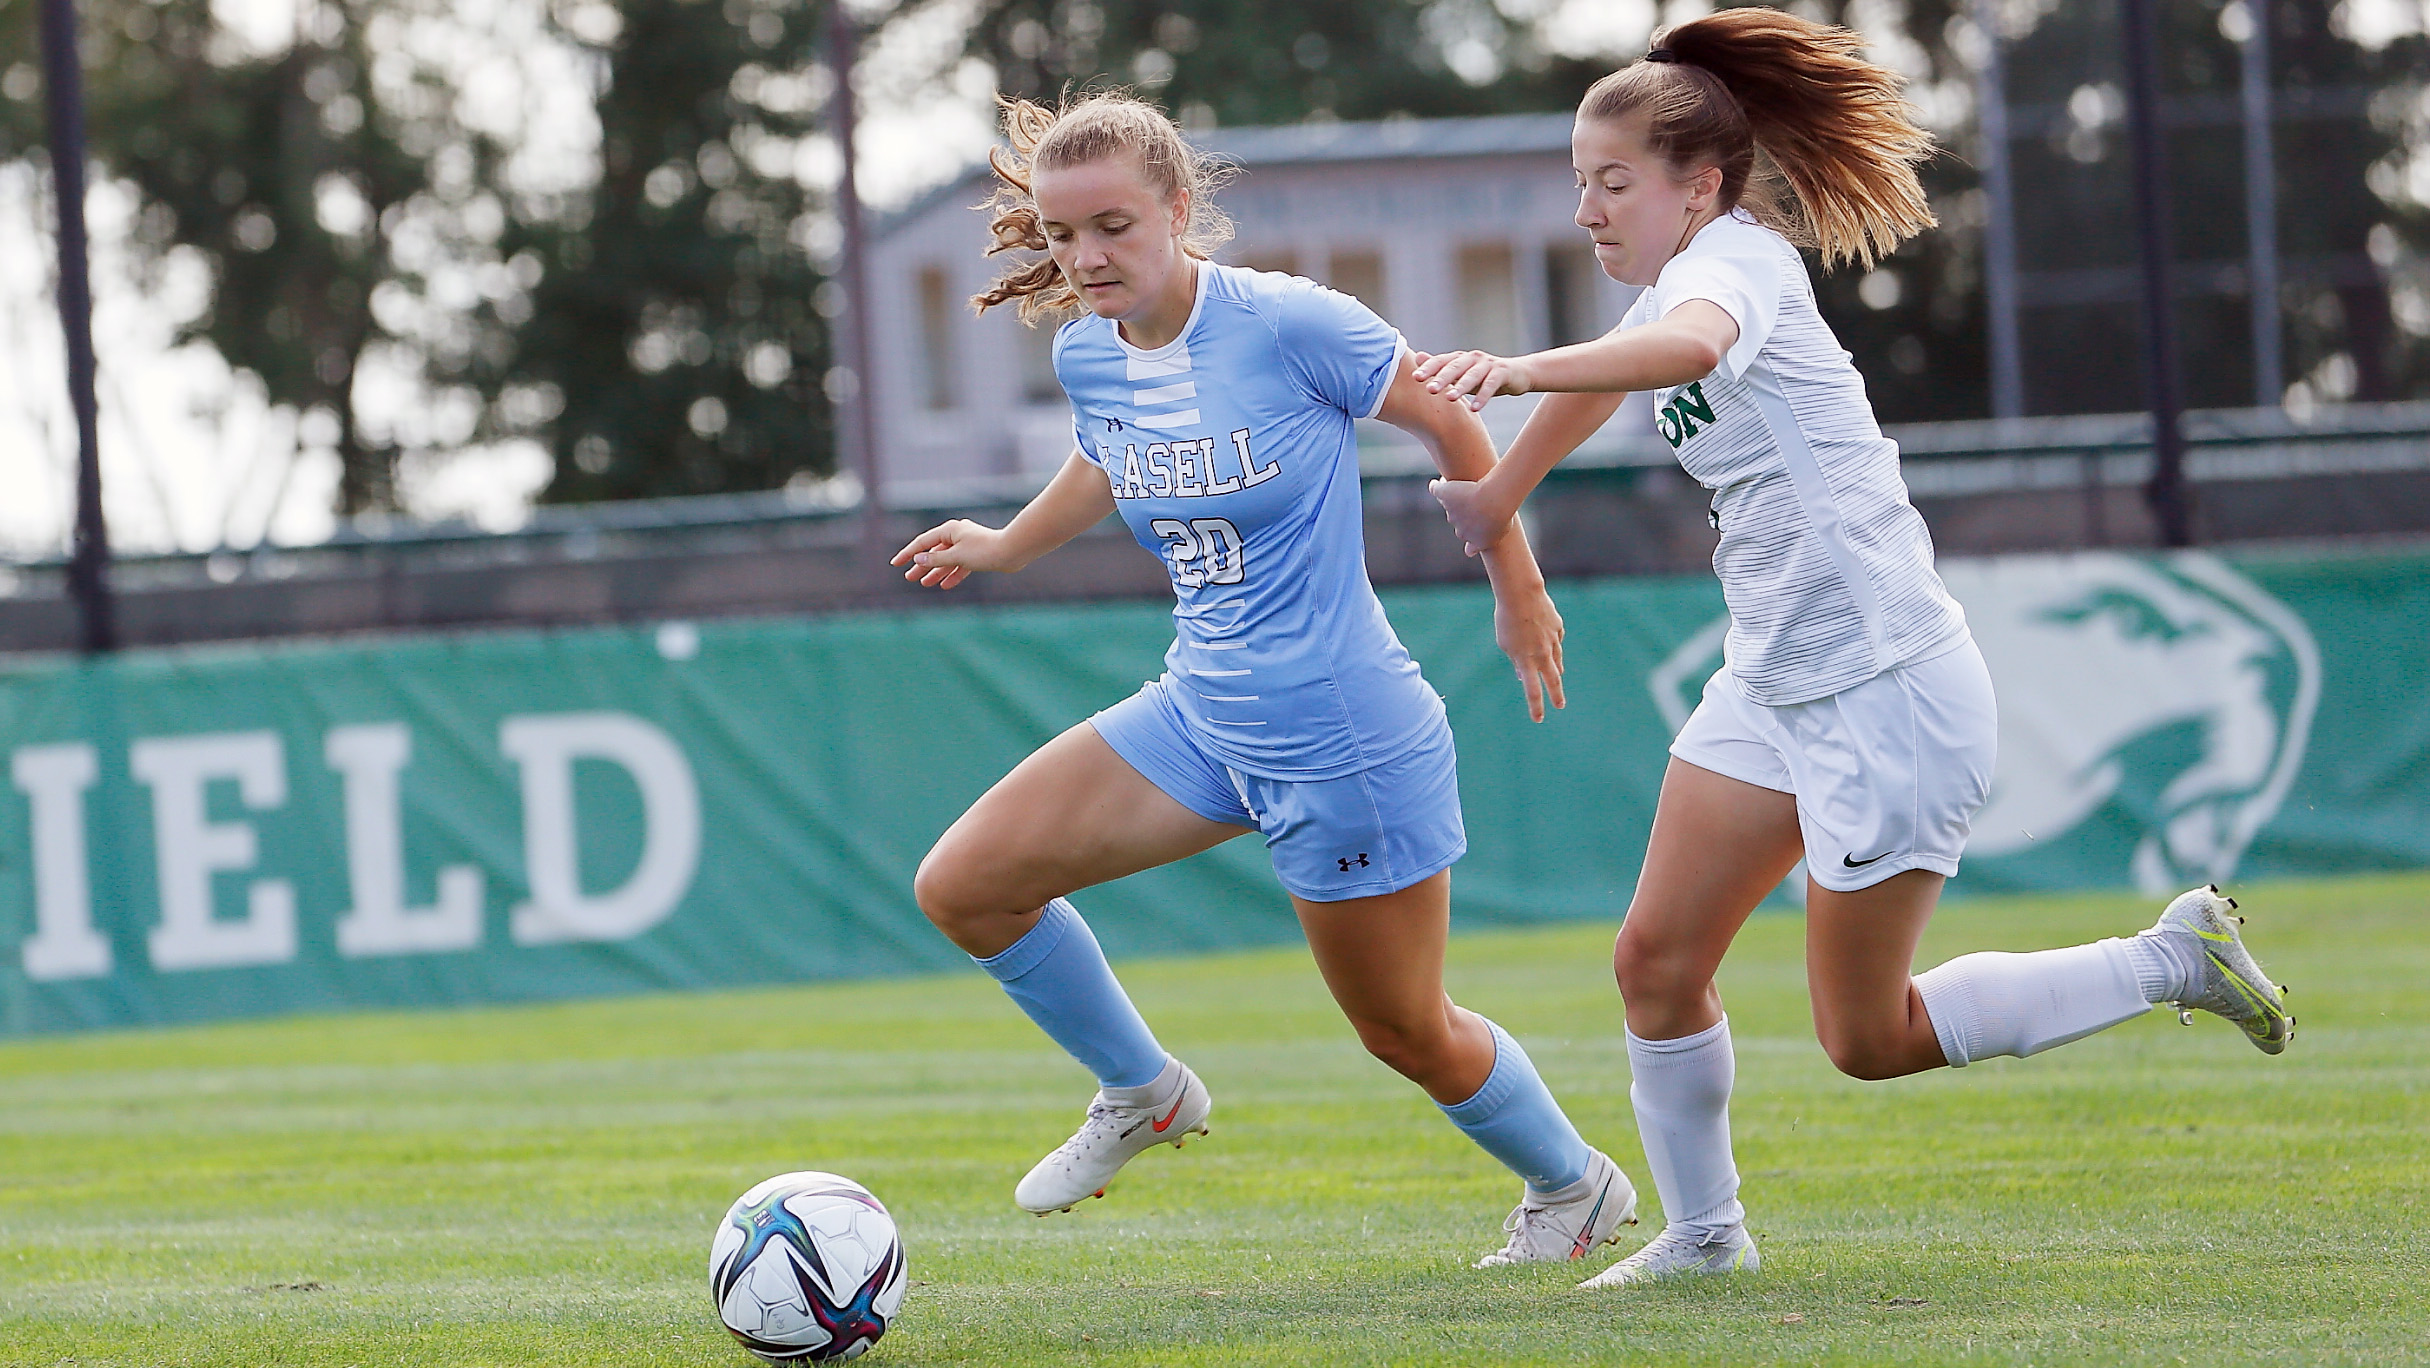 WSOC: Lasers bounce back with strong showing against Simmons